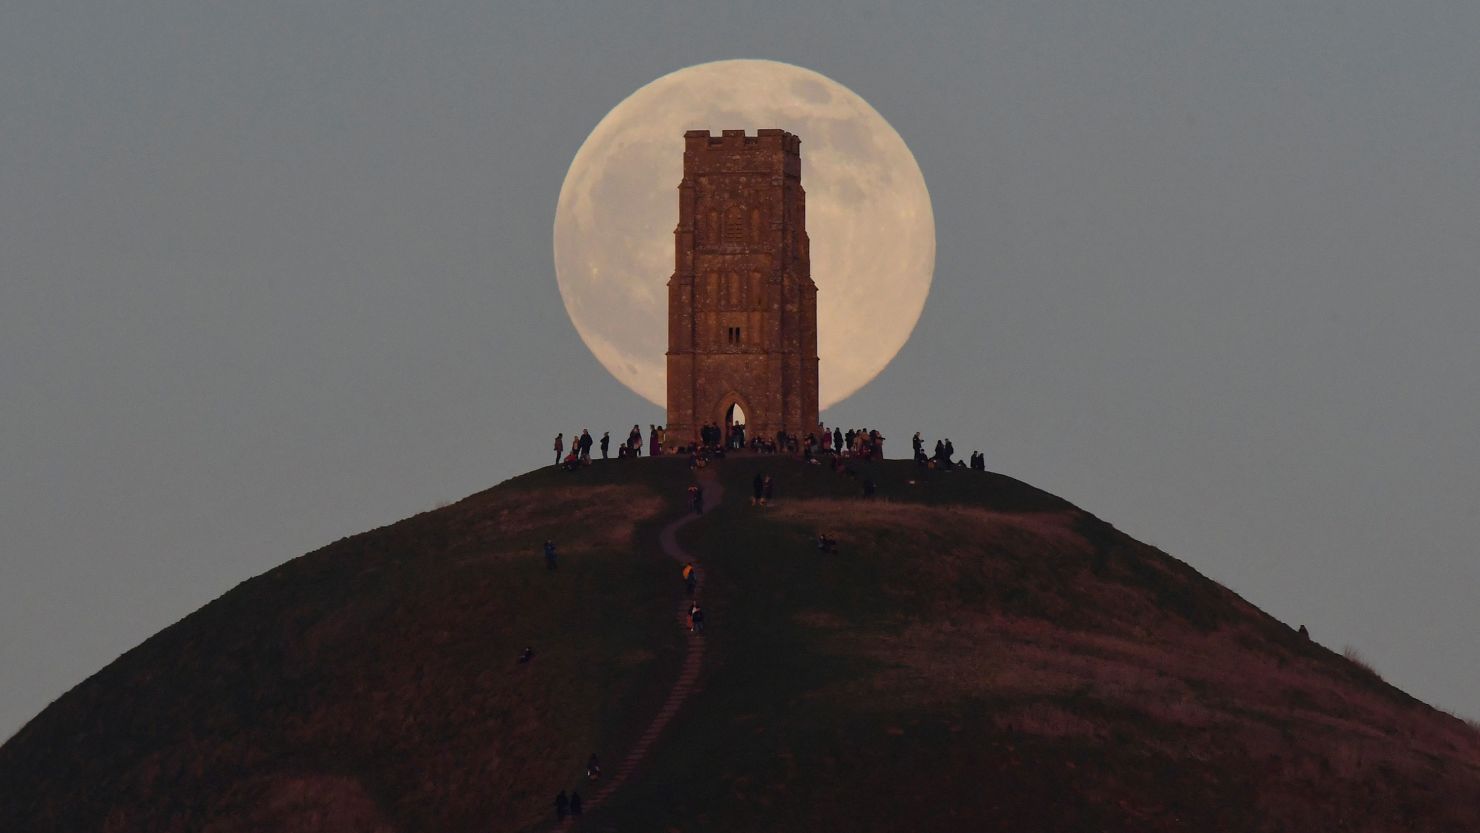 People stand beside St Michael's Tower as they watch the full moon, sometimes known as a "wolf moon," rise behind Glastonbury Tor in Glastonbury, England, on January 17.